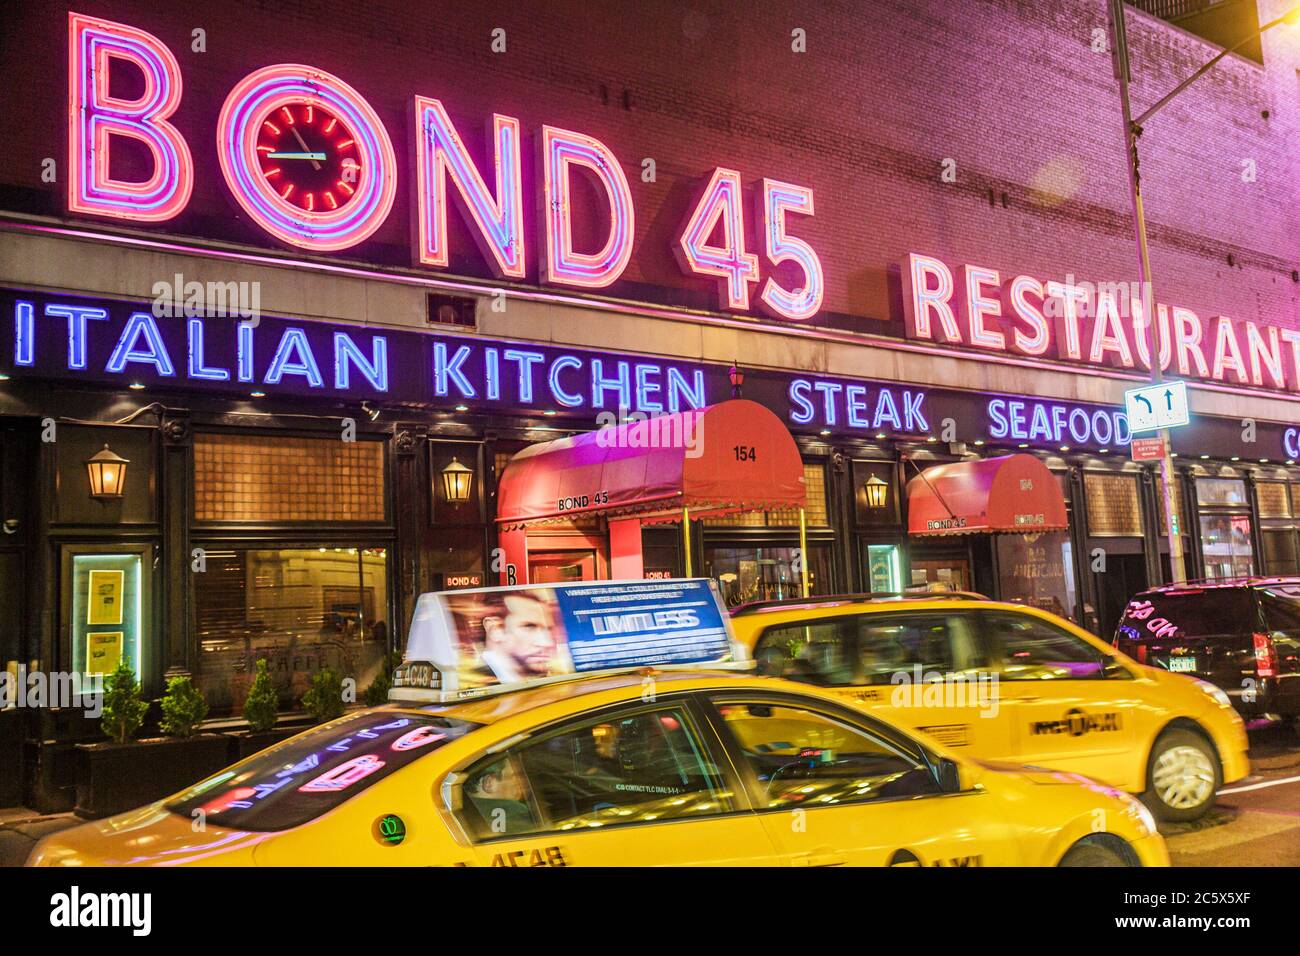 New York City,NYC NY Manhattan,Midtown,45th Street,Bond 45 restaurant,restaurants,food,dine,eat out,service,dining,Italian food,steakhouse,seafood,neo Stock Photo